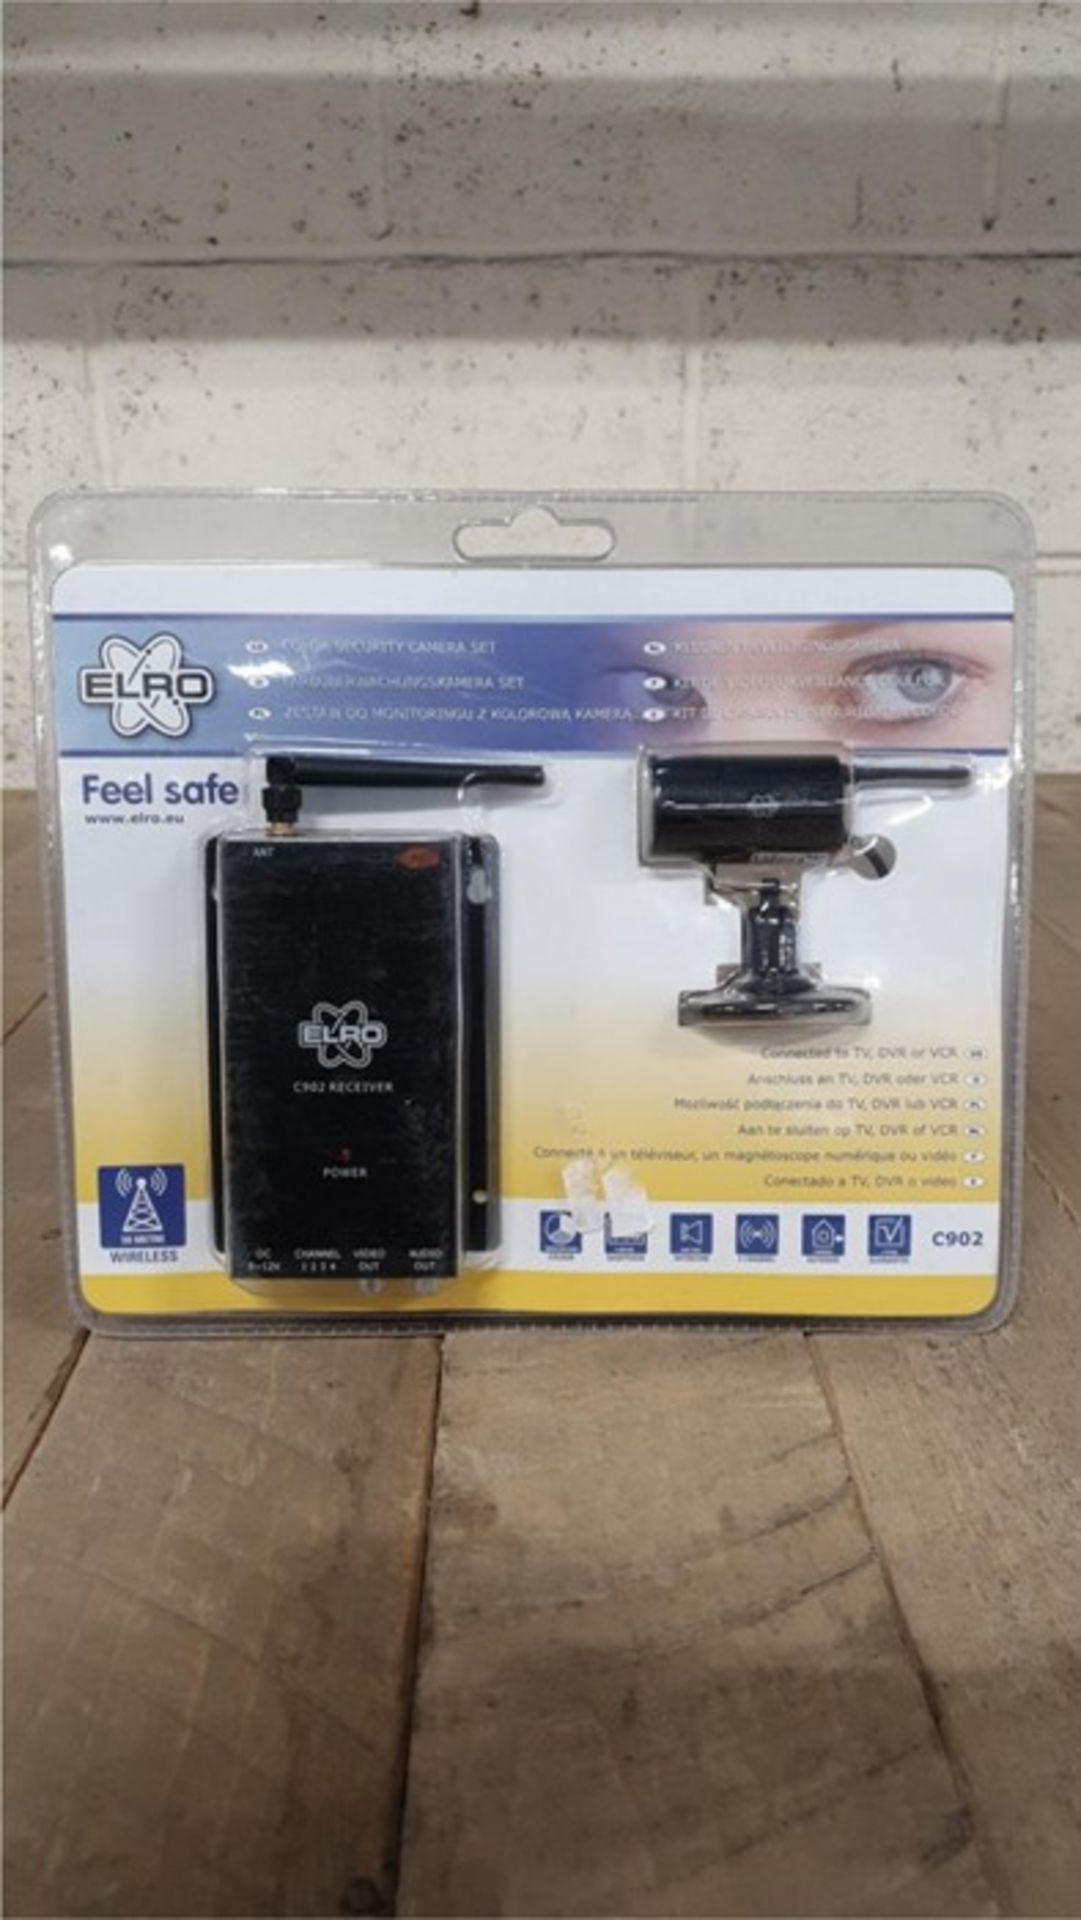 1 BOXED ELRO FEEL SAFE WIRELESS UPTO 50 METRE SECURITY CAMERA (VIEWING HIGHLY RECOMMENDED)